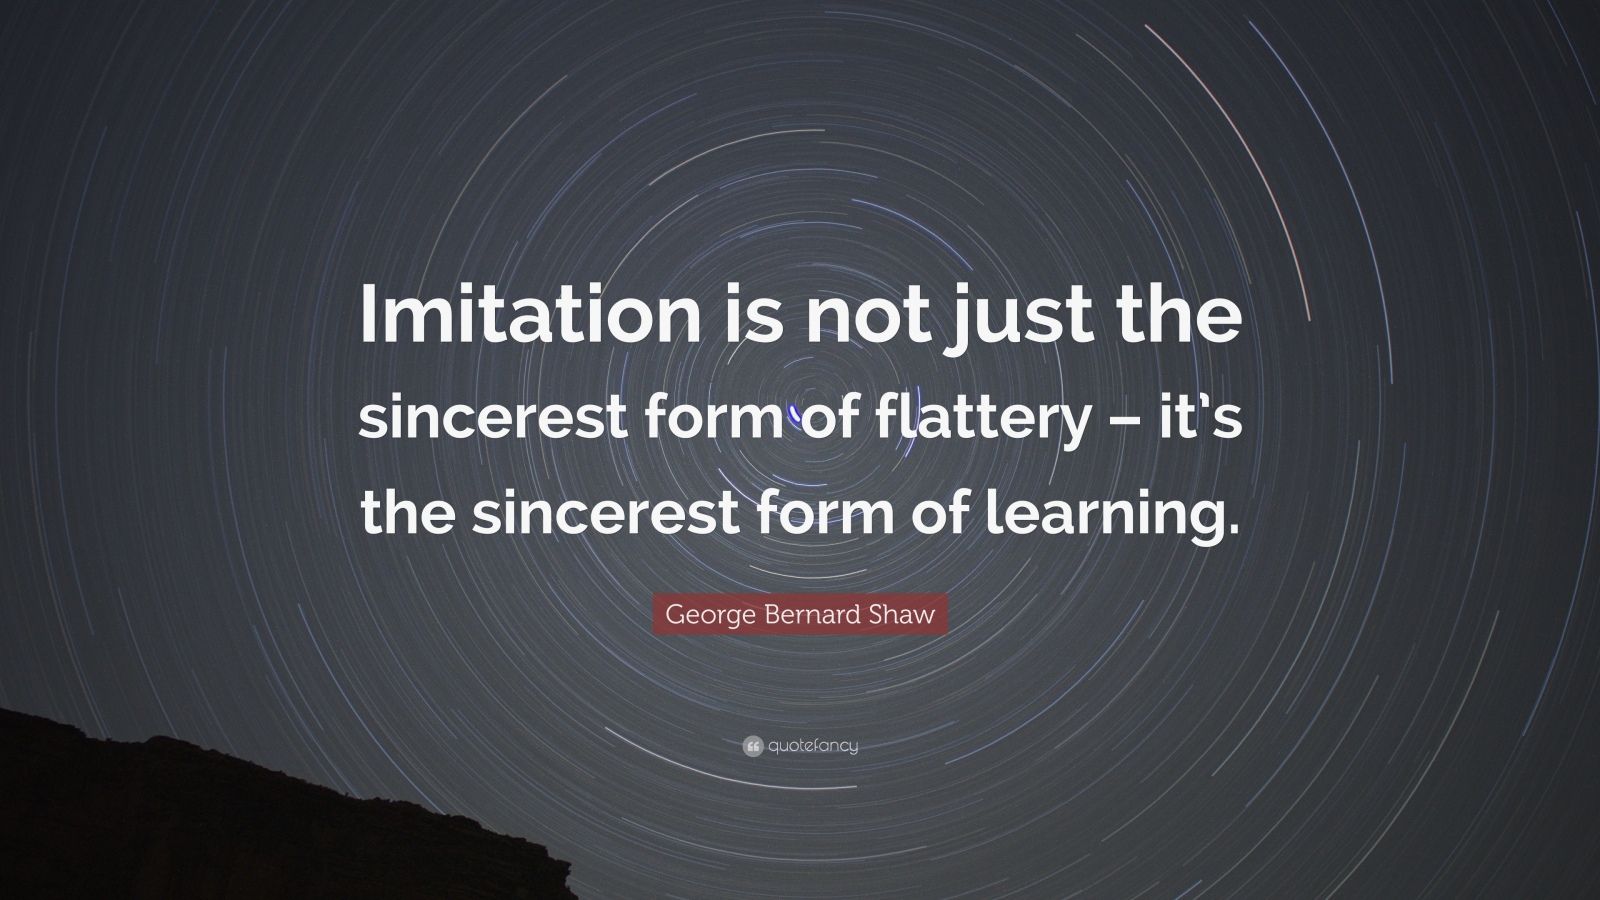 George Bernard Shaw Quote: “Imitation is not just the sincerest form of